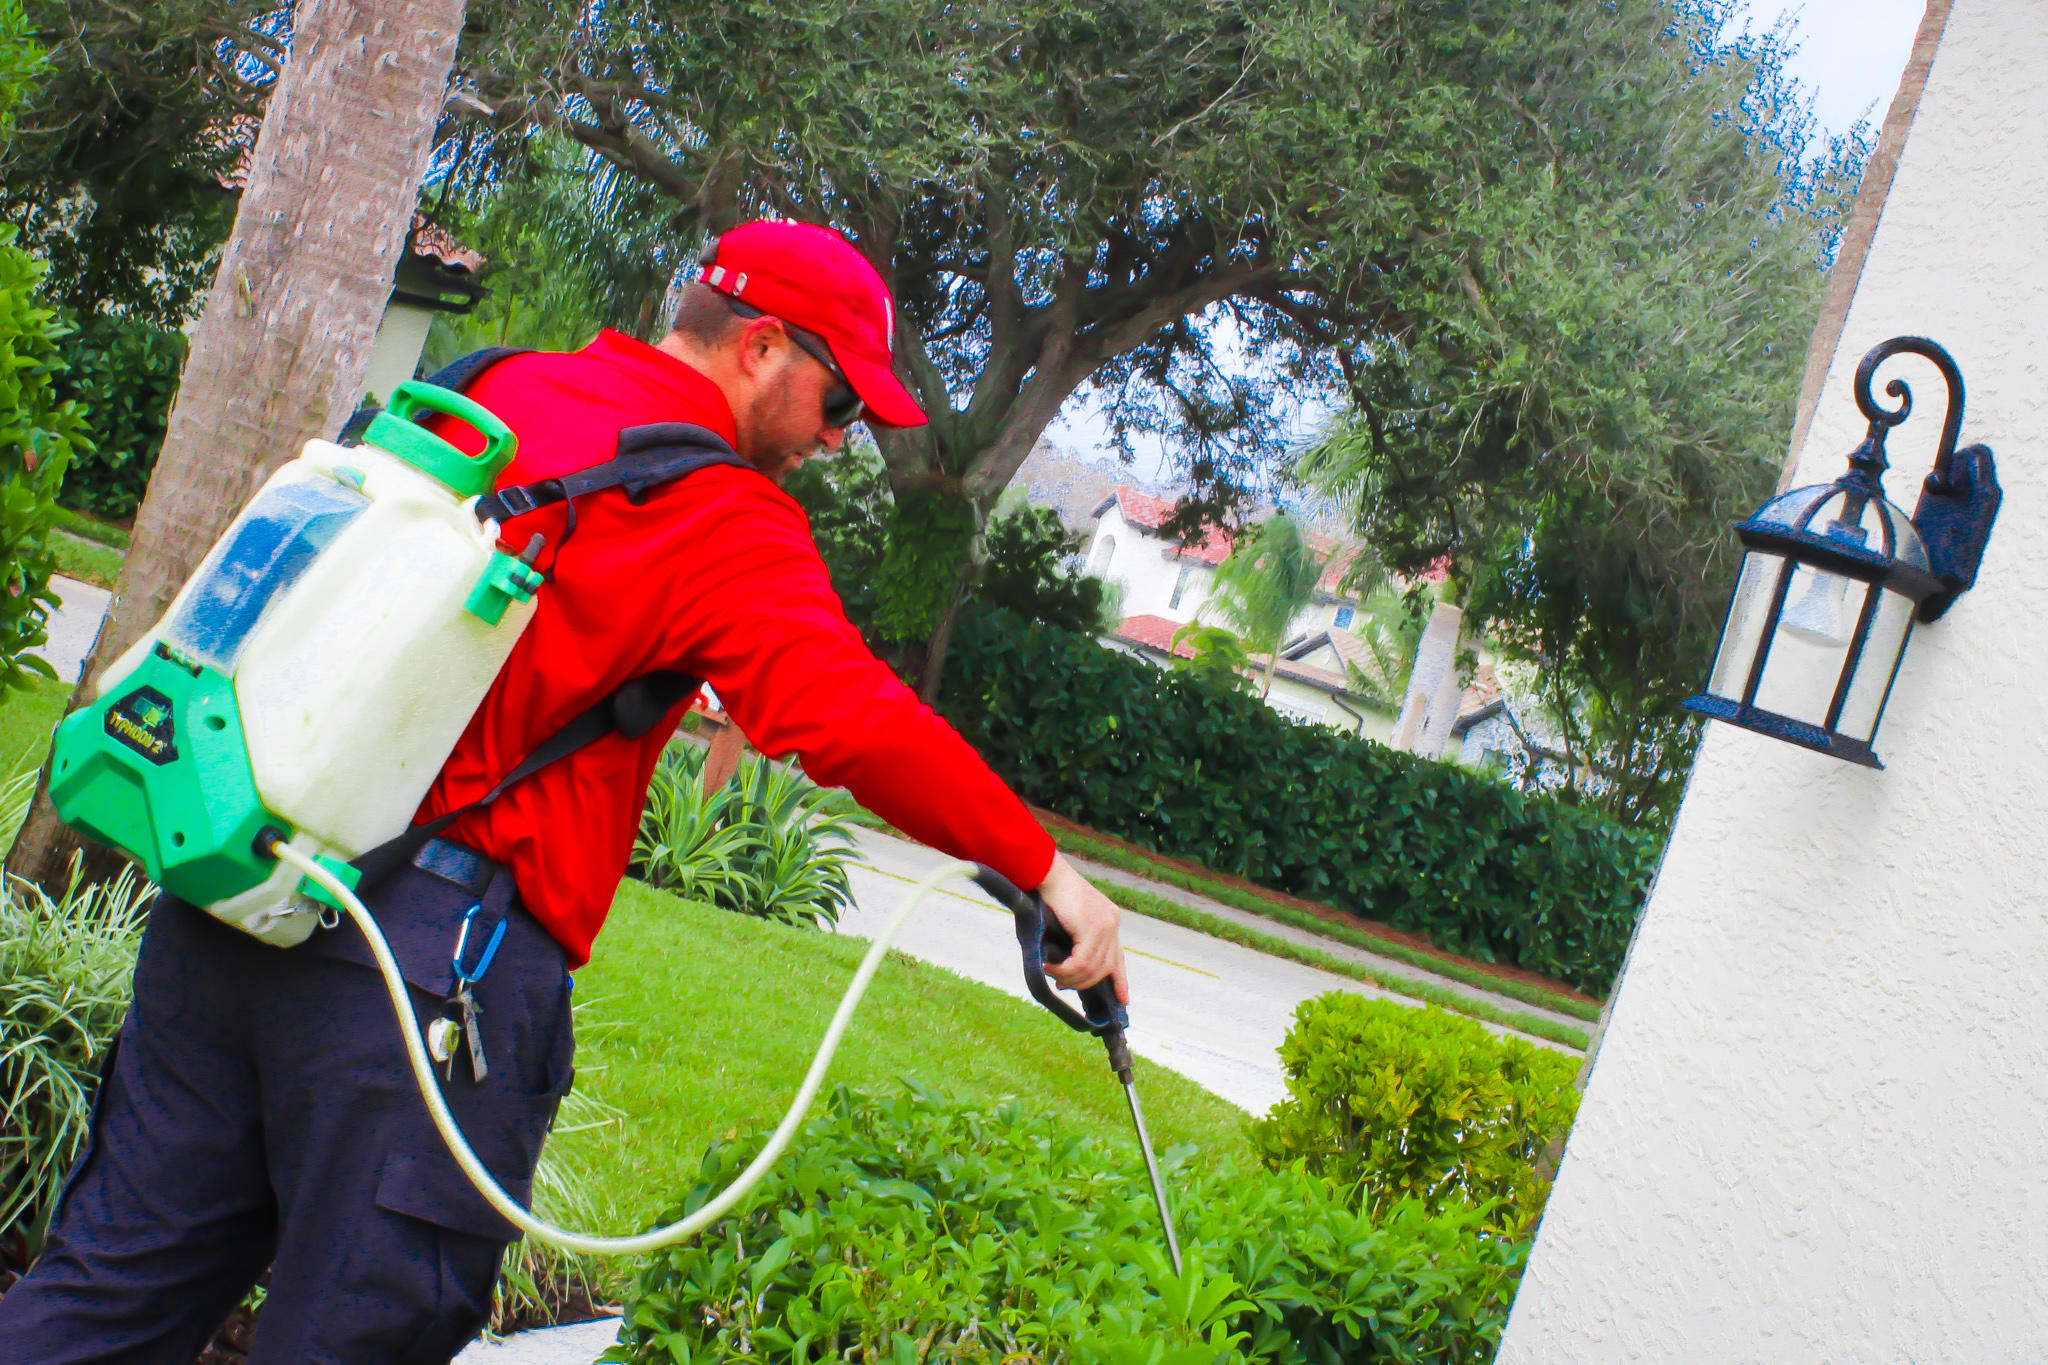 We attack and prevent pesky pests from every and all angles, inside and out. This is the only way we can guarantee you complete pest protection whether it’s your home or business. Call us today for a complimentary quote and to learn how you can live pest free.